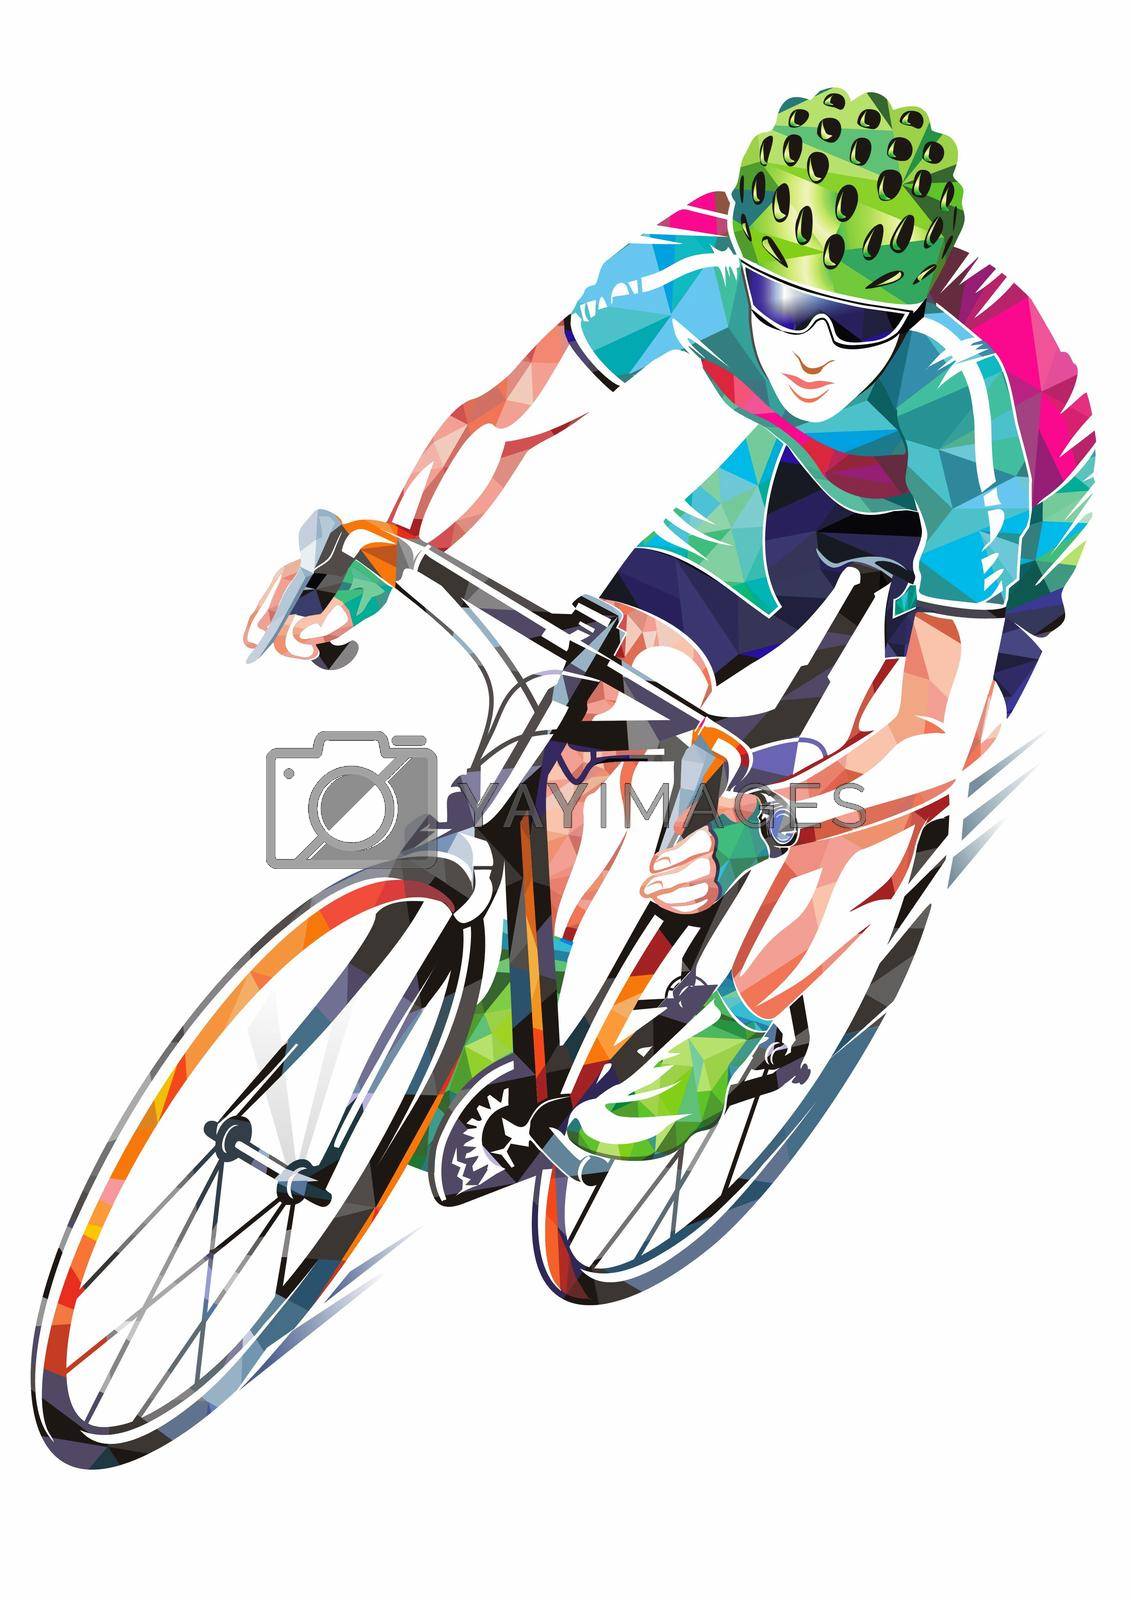 Royalty free image of Road Bicycle Racer Geometric Design Illustration by welcomia